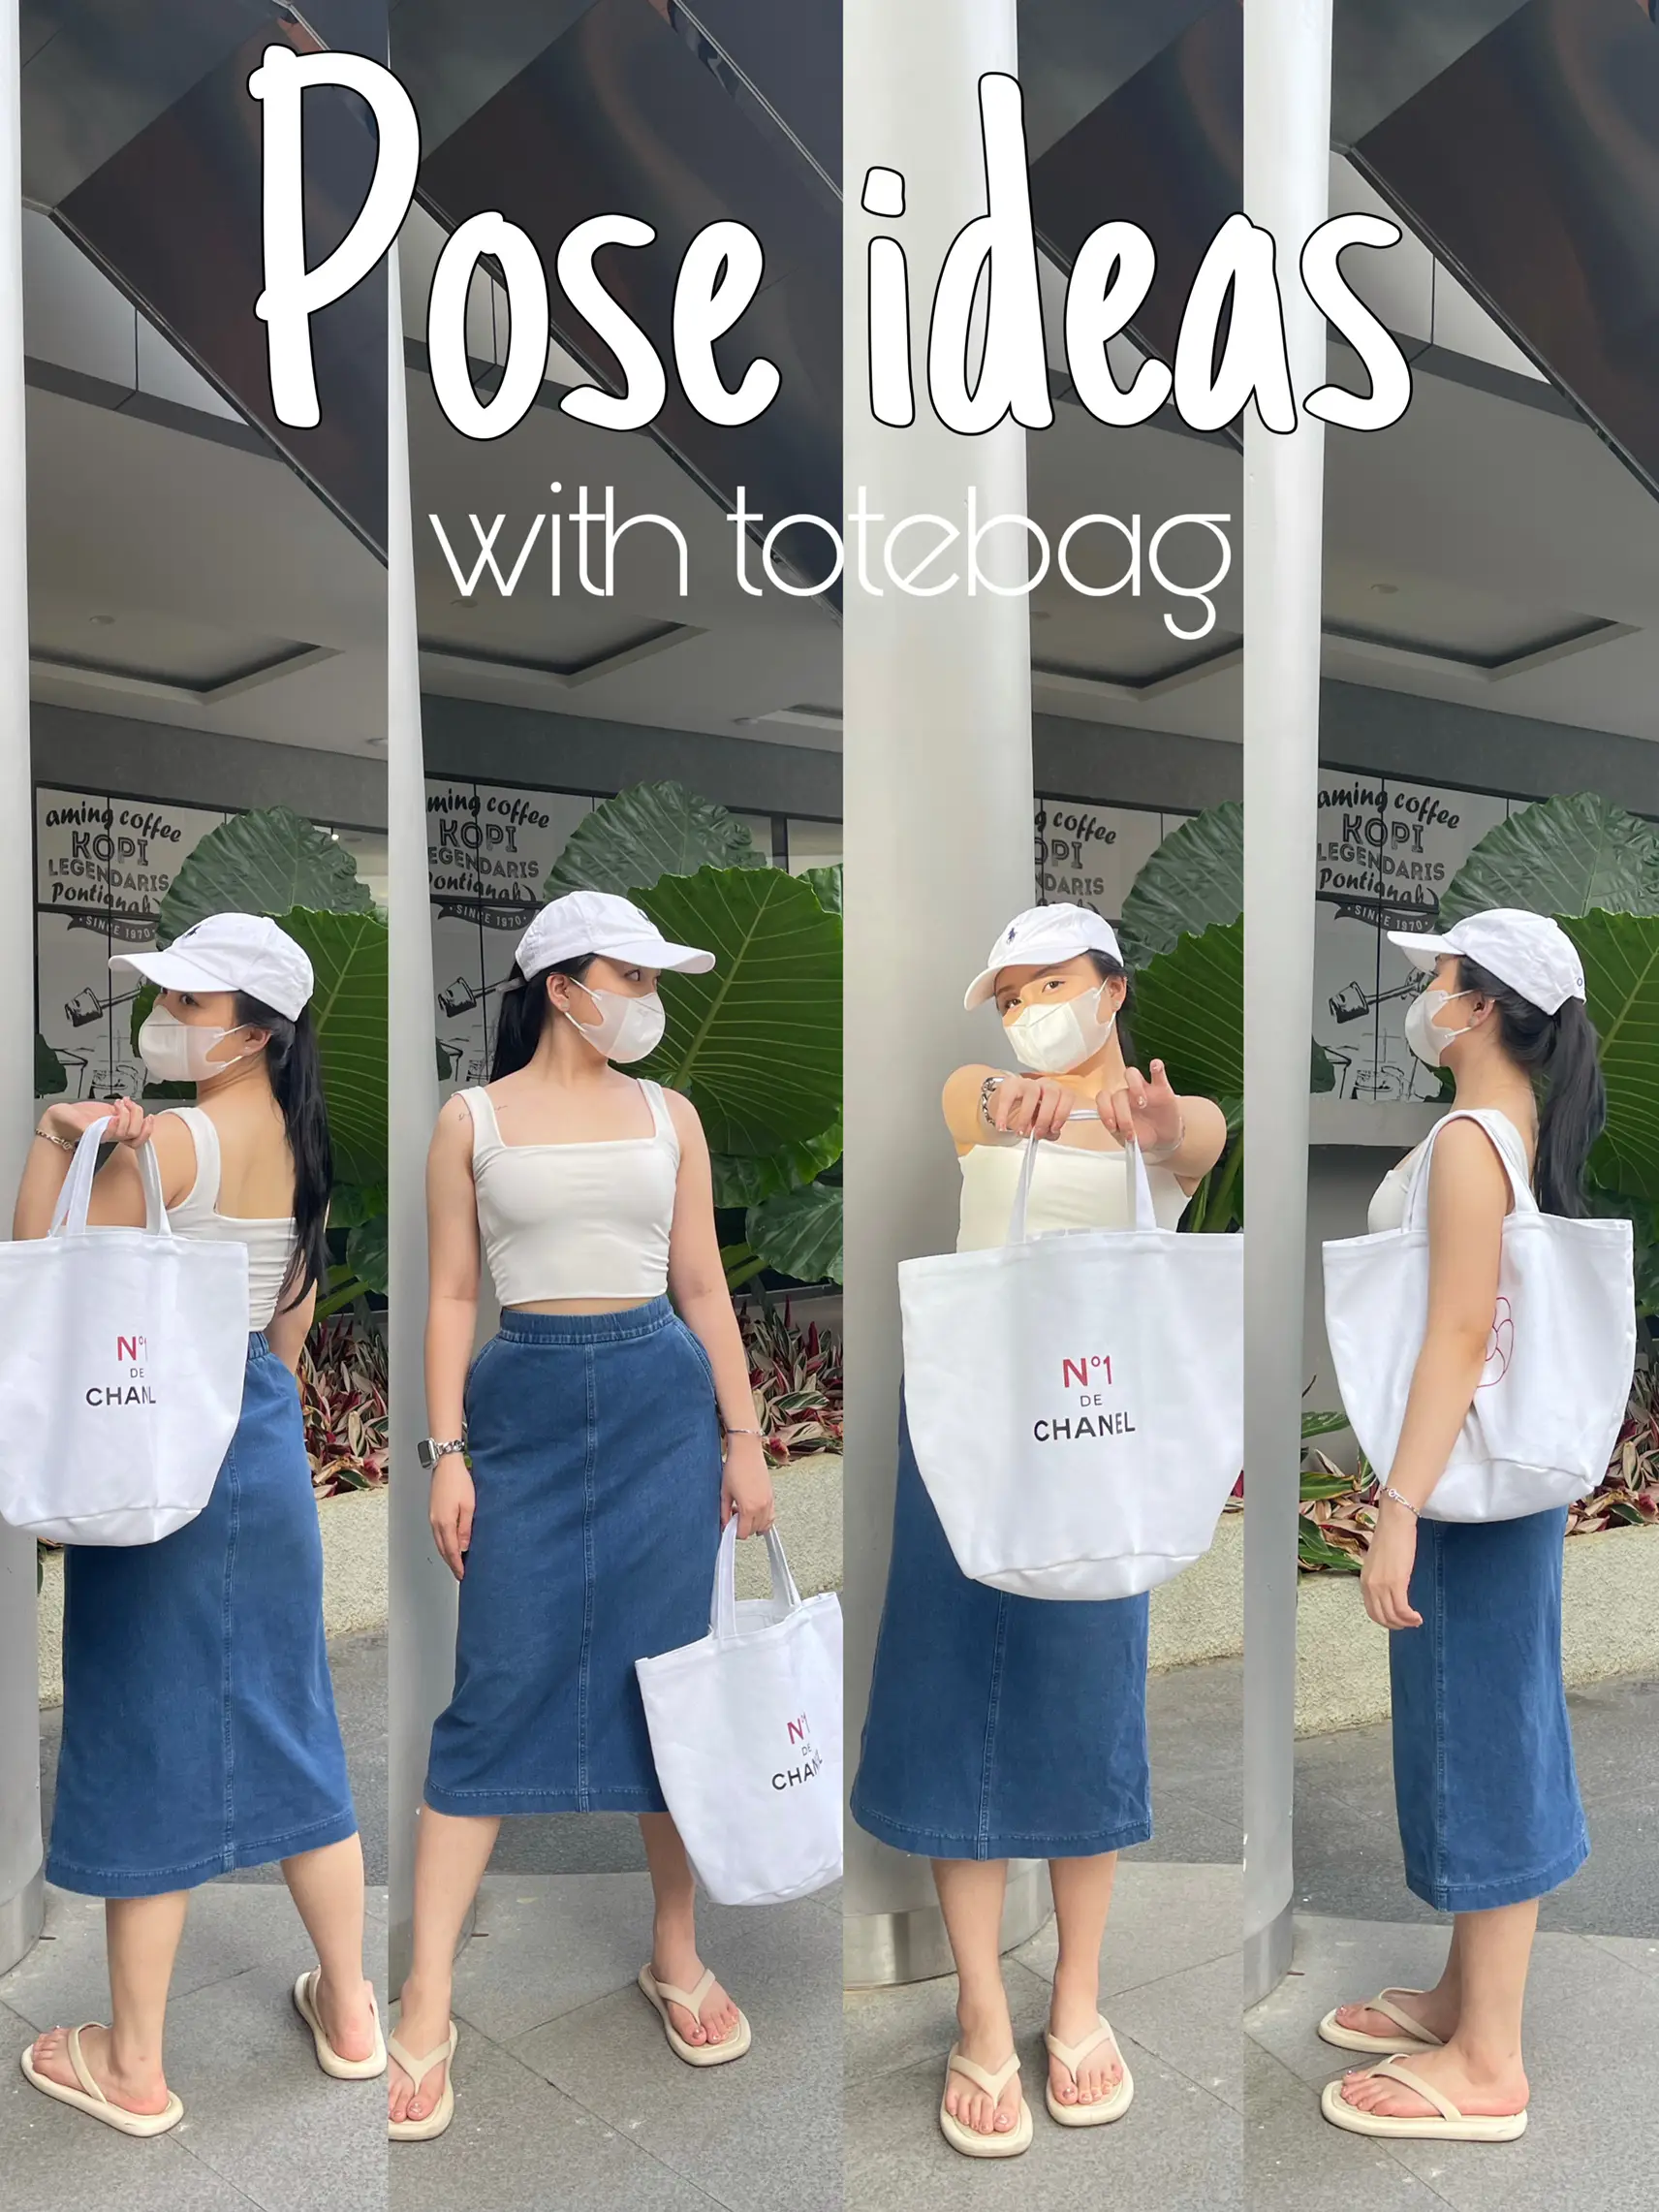 Pose ideas with totebag 💖, Gallery posted by Velencarissa